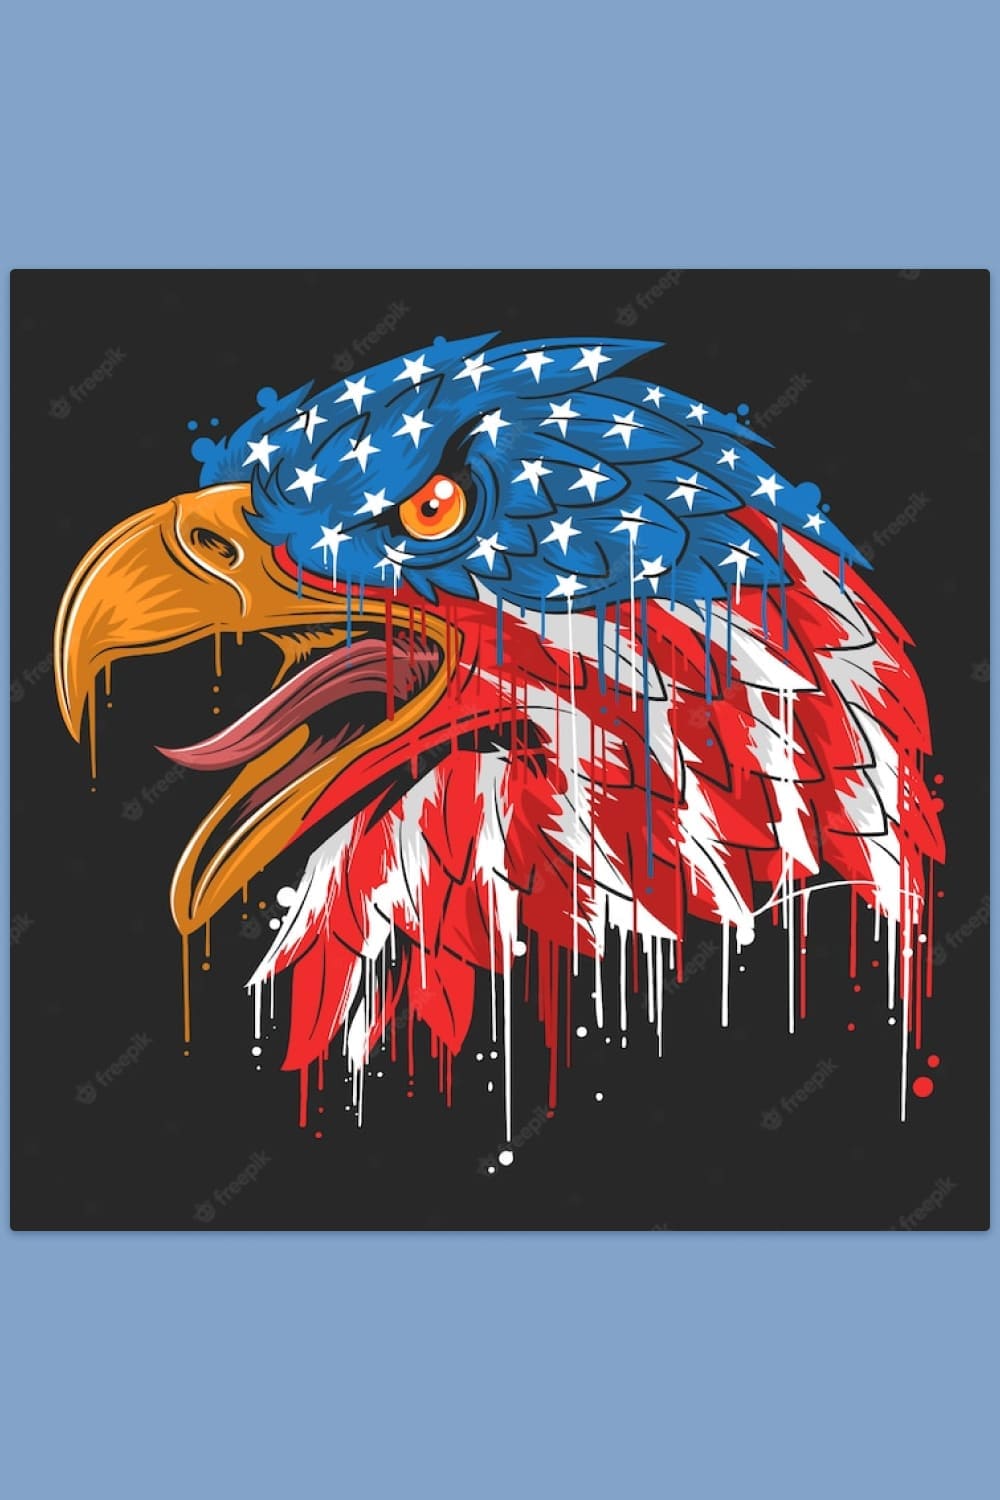 Drawing of an eagle's head in the colors of the American flag.